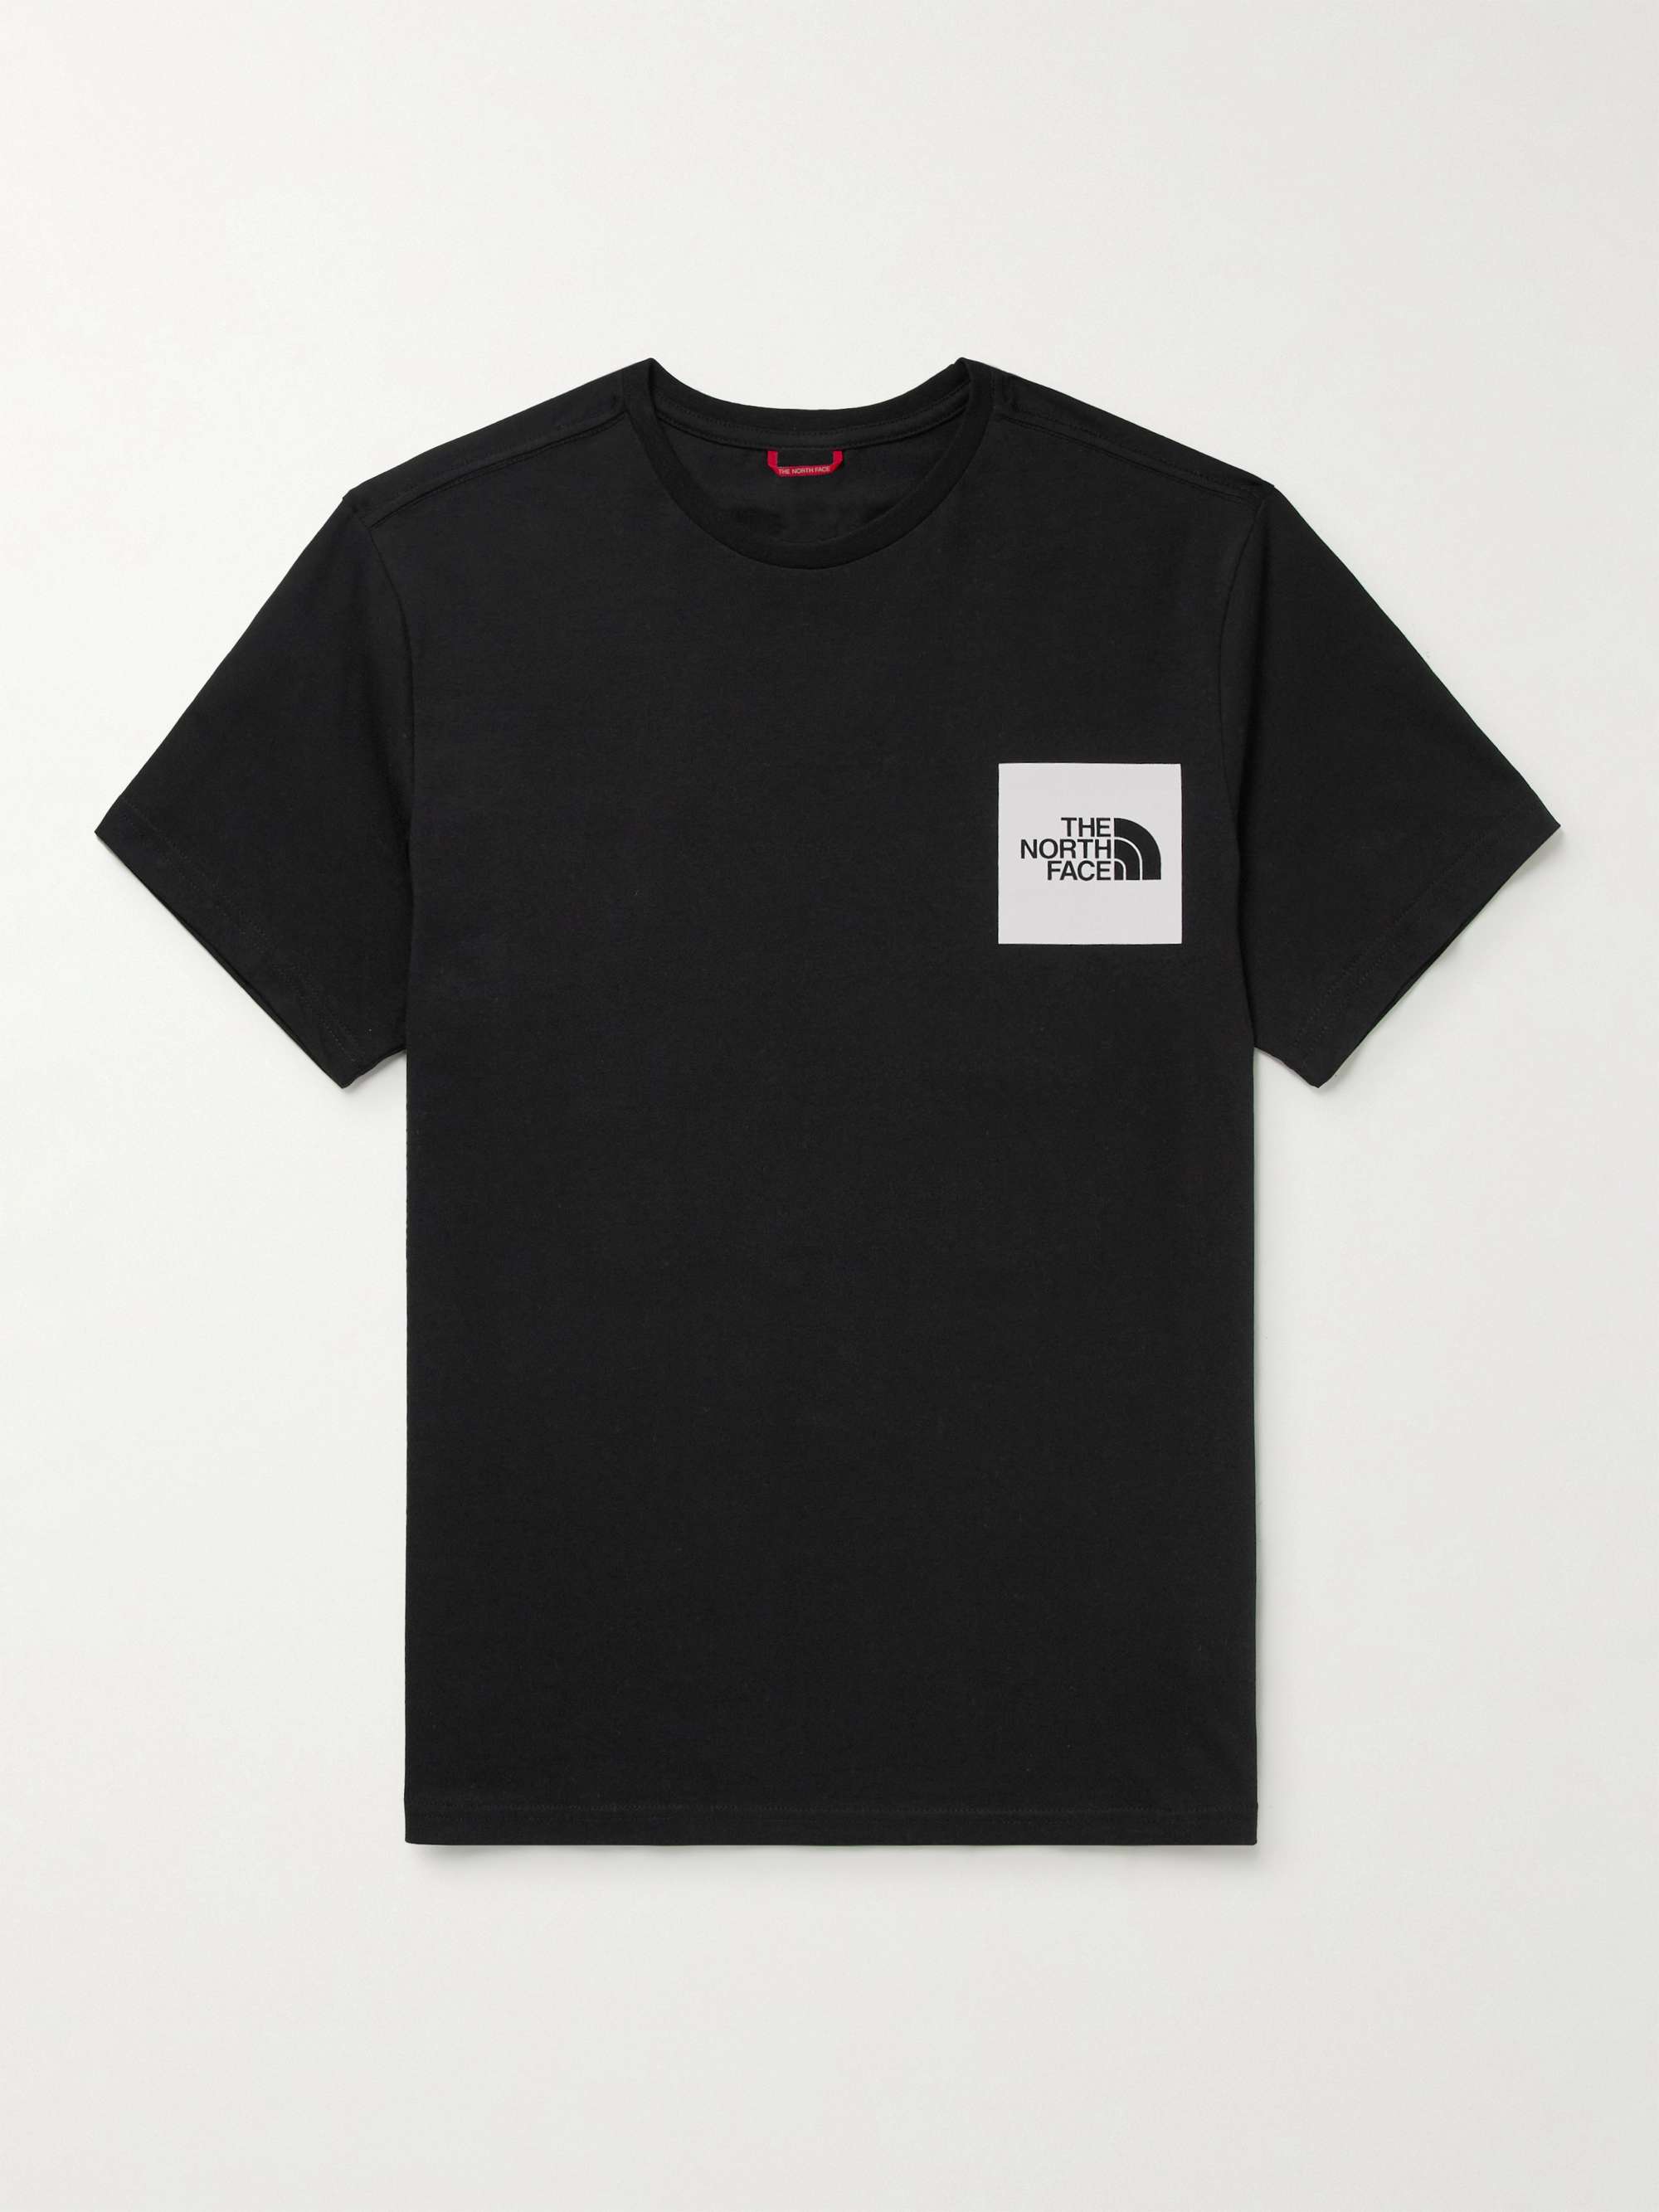 THE NORTH FACE Galahm Printed Cotton-Jersey T-Shirt